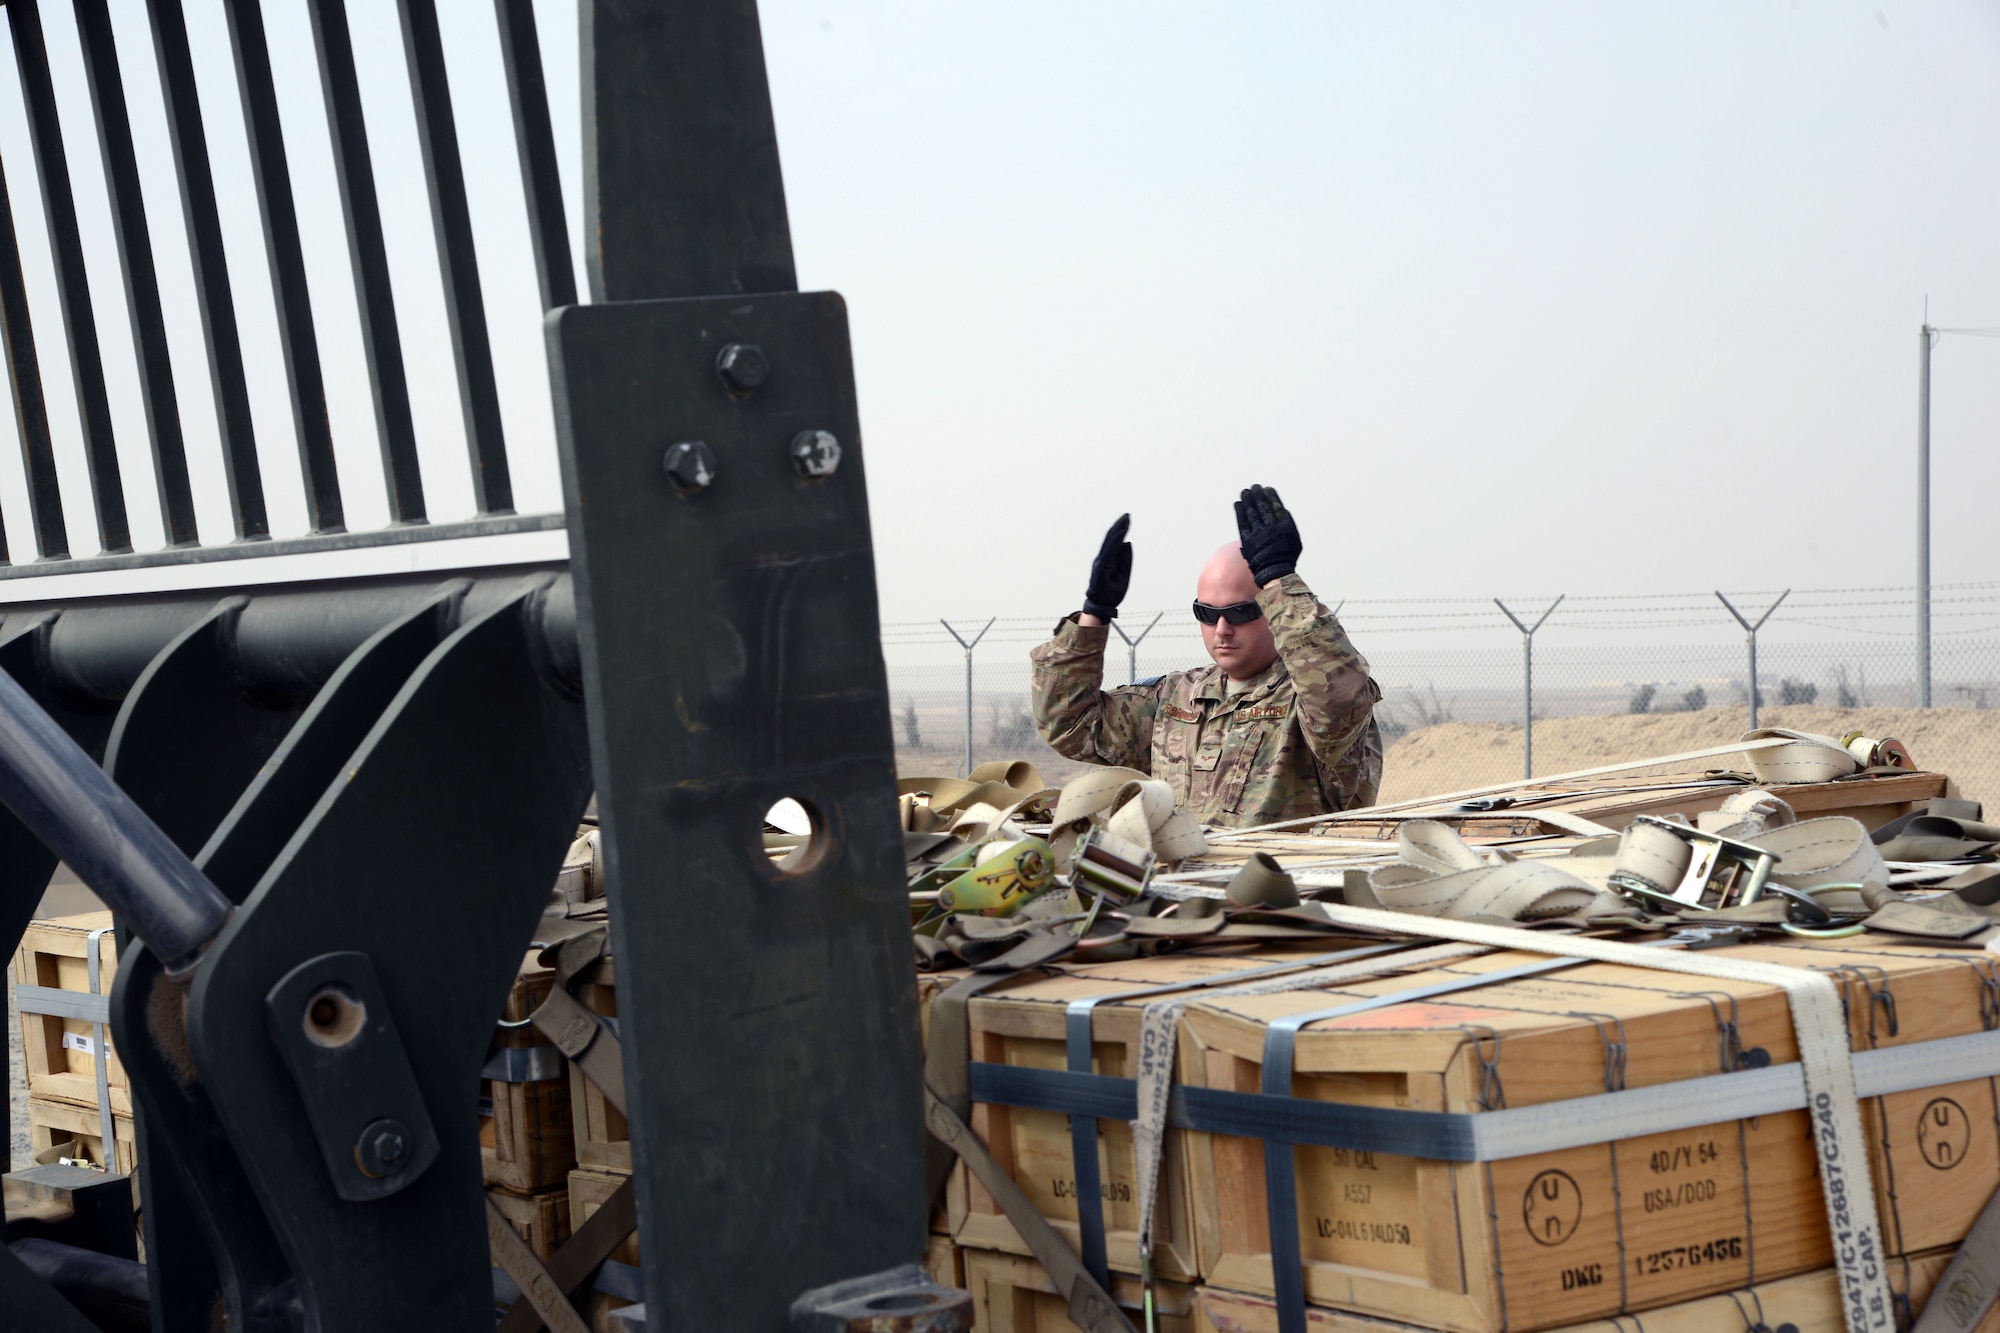 SOUTHWEST ASIA - Senior Airman Douglas Rossmiller, 386th Expeditionary Maintenance Squadron Munitions Flight, directs the movement of a pallet of munitions here Jan. 30, 2015. Since the beginning of Operation INHERENT RESOLVE, the Munitions Flight has adopted three new missions and grown substantially in both storage area and manpower. (U.S. Air Force photo by Tech. Sgt. Jared Marquis/released)